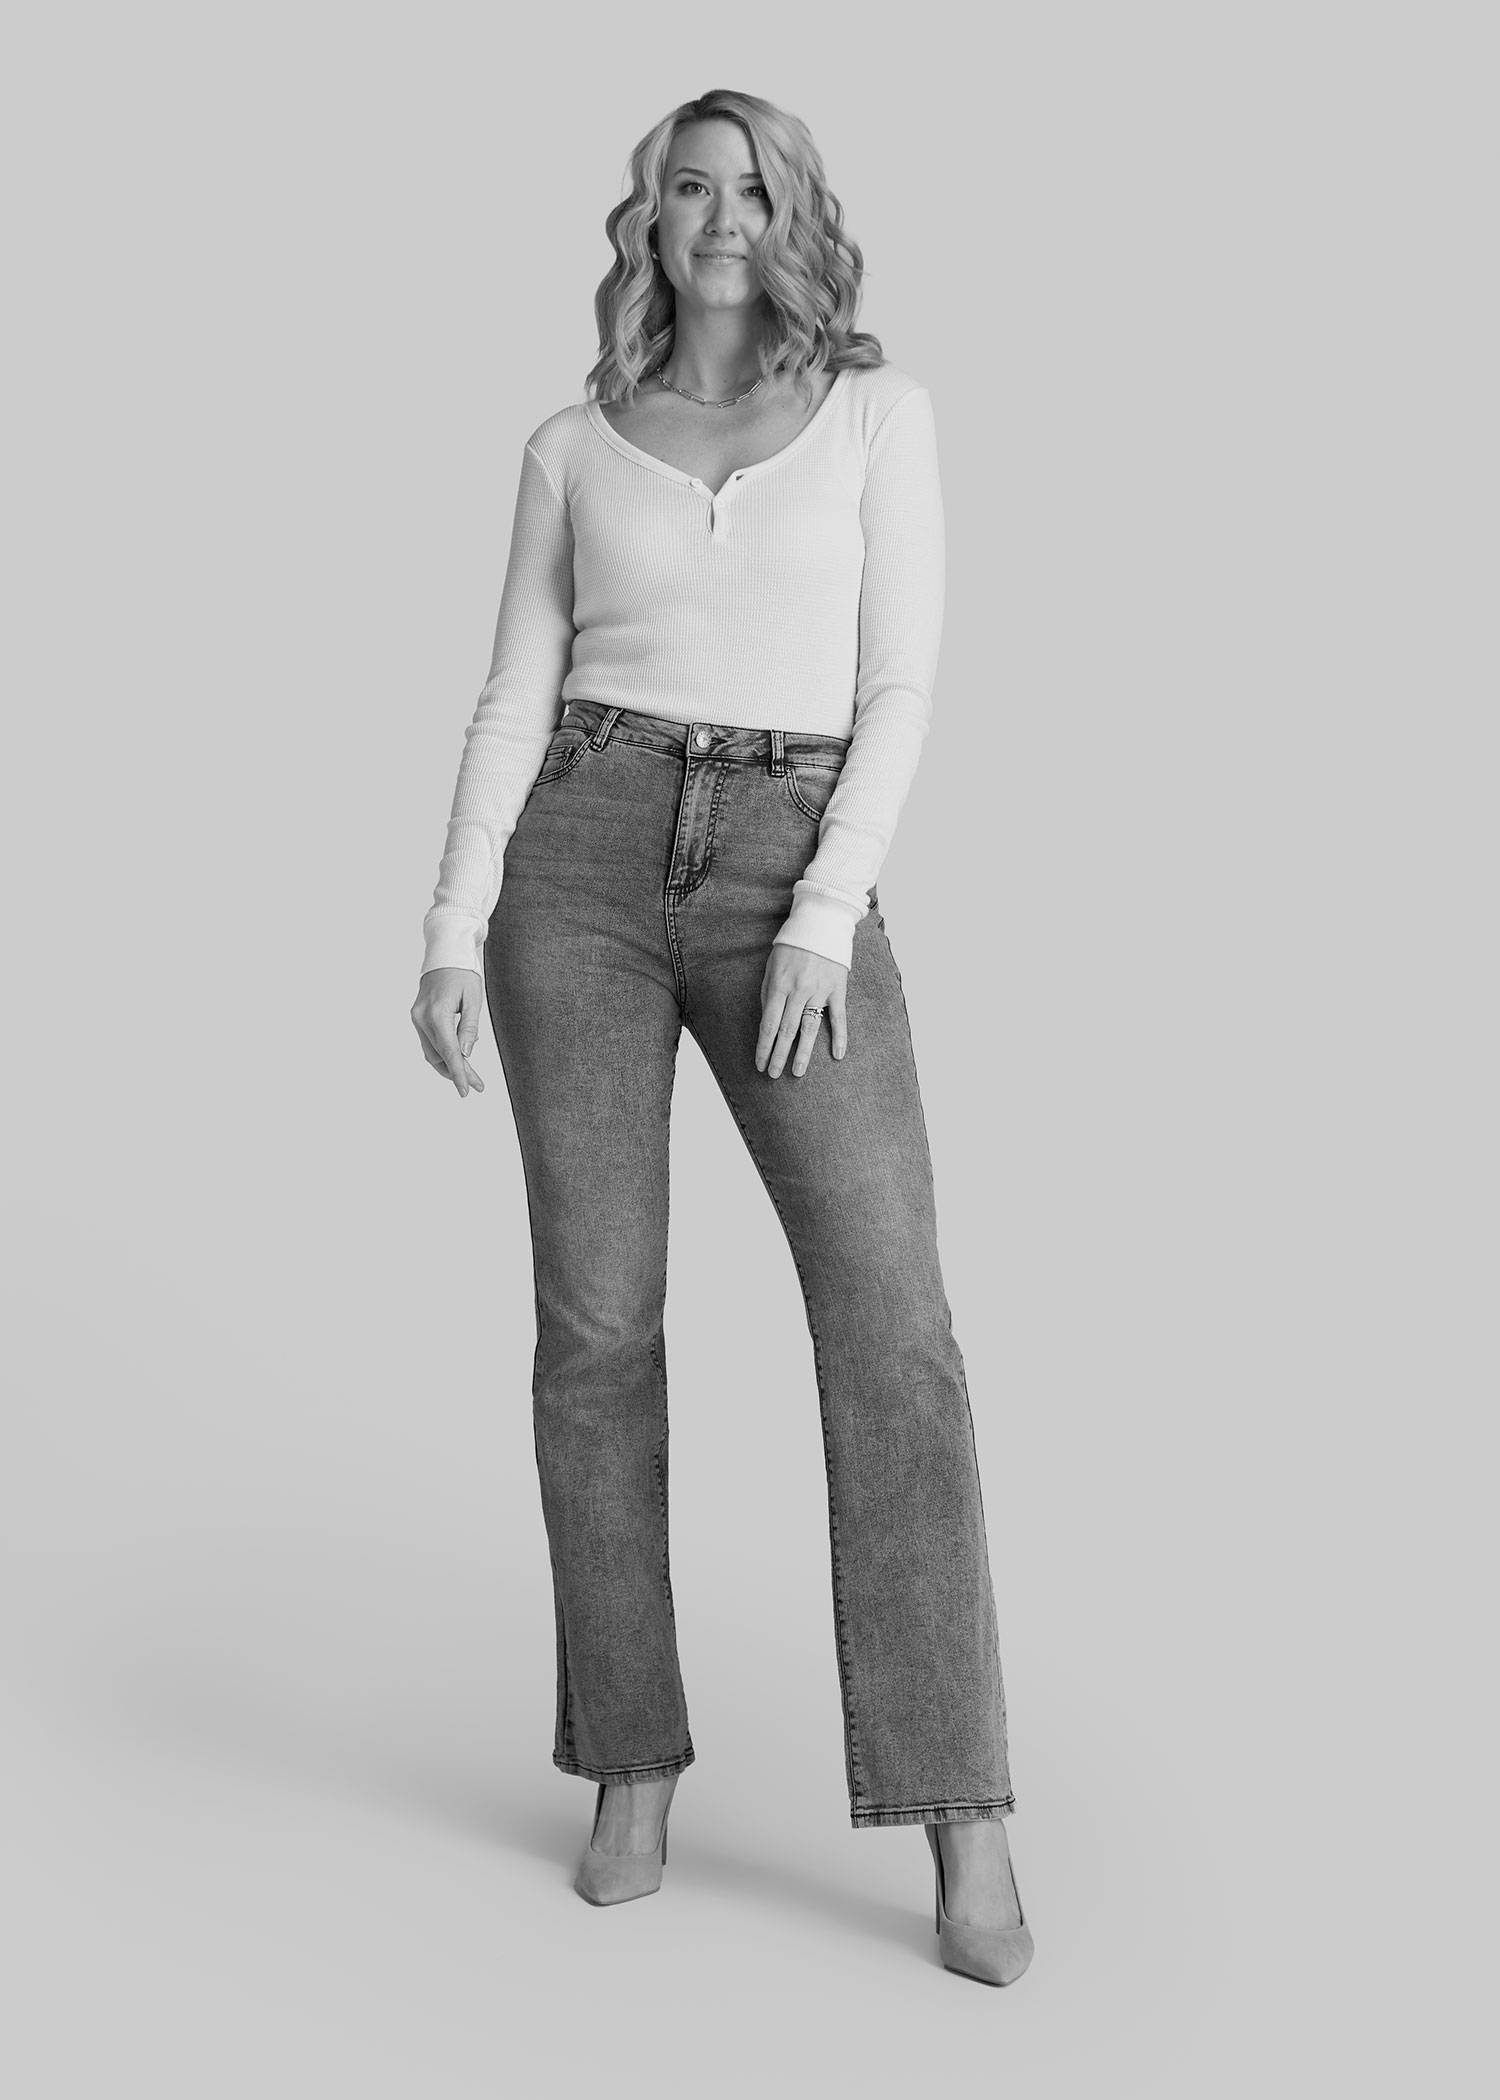 A tall woman wearing a white henley long sleeve and bootcut jeans